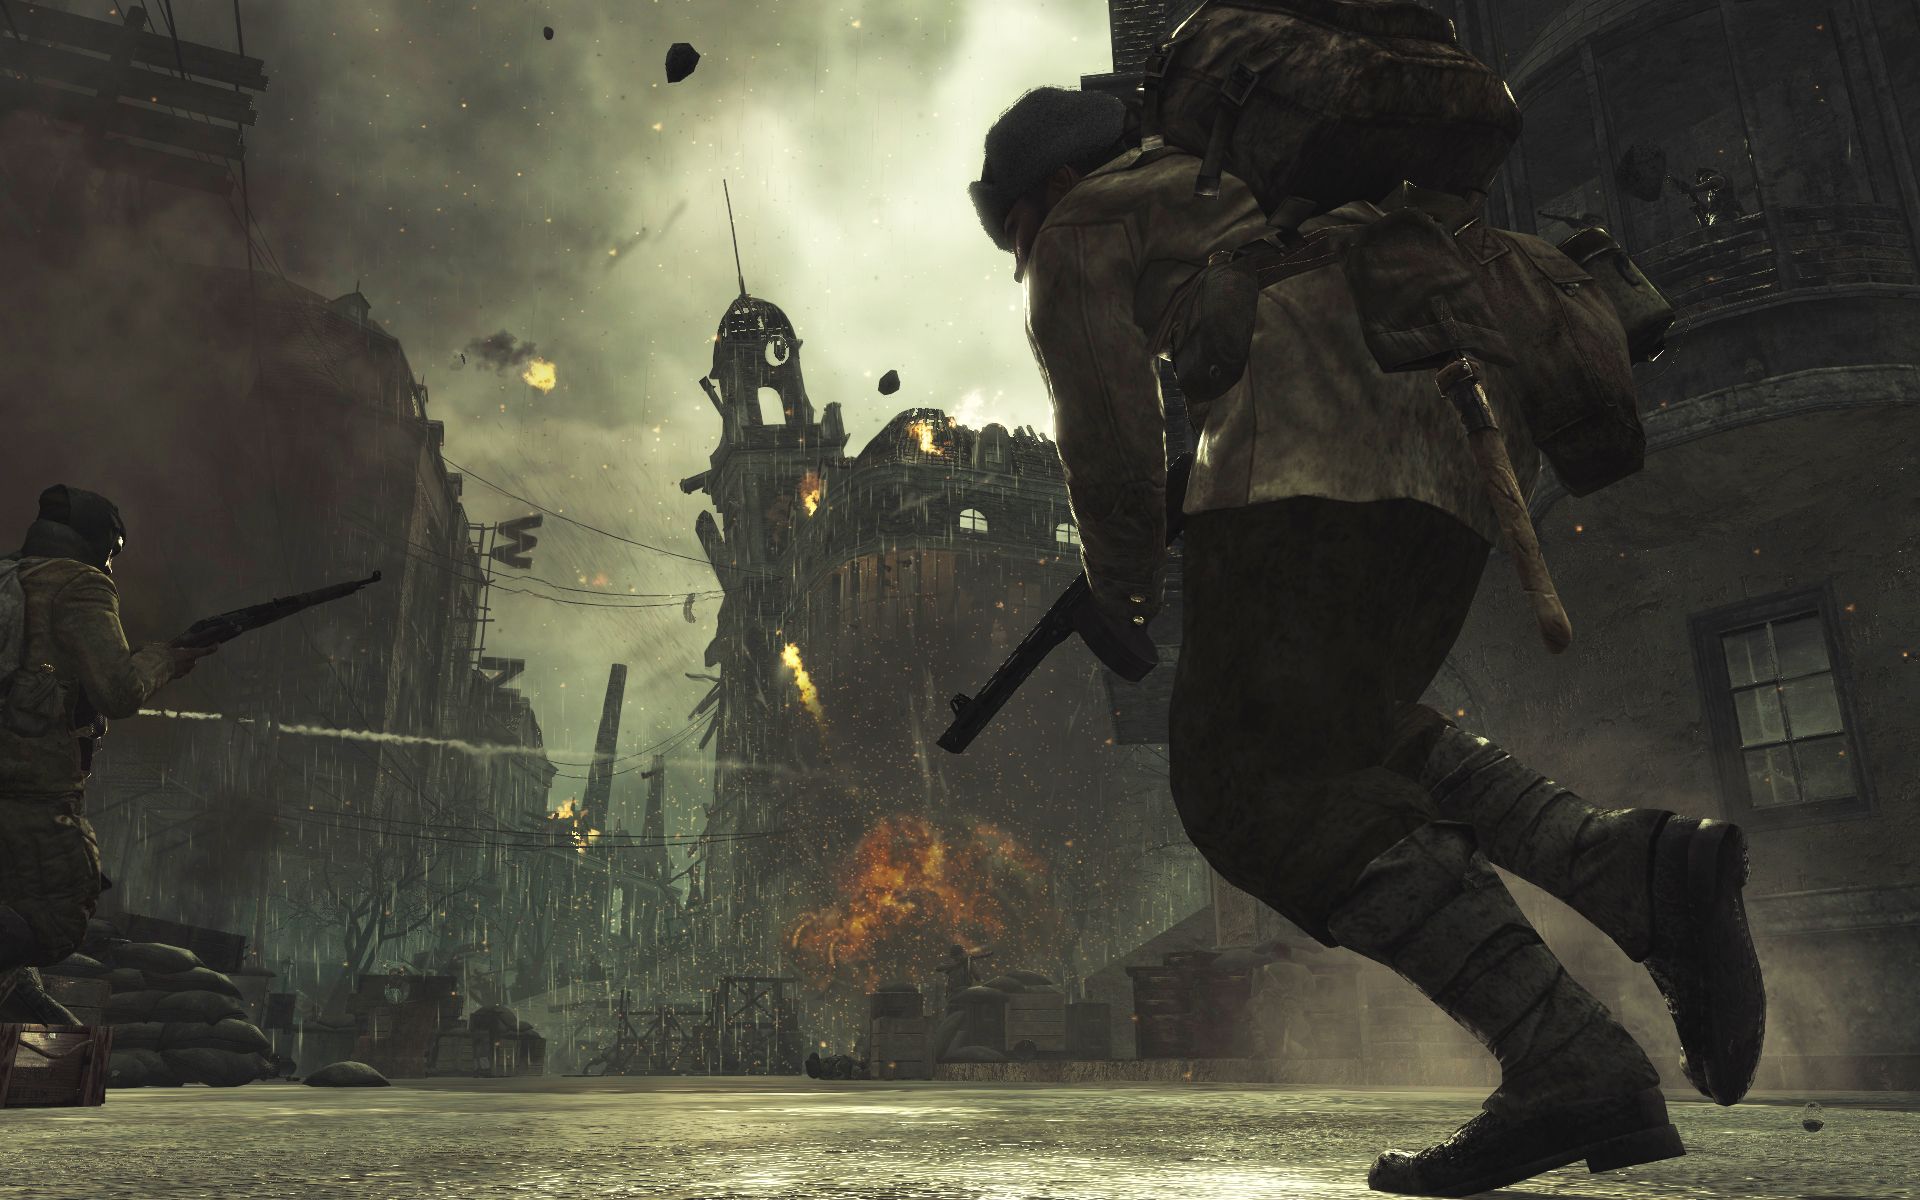 CoD: World At War - fear, familiarity and the moral conflict, Game culture